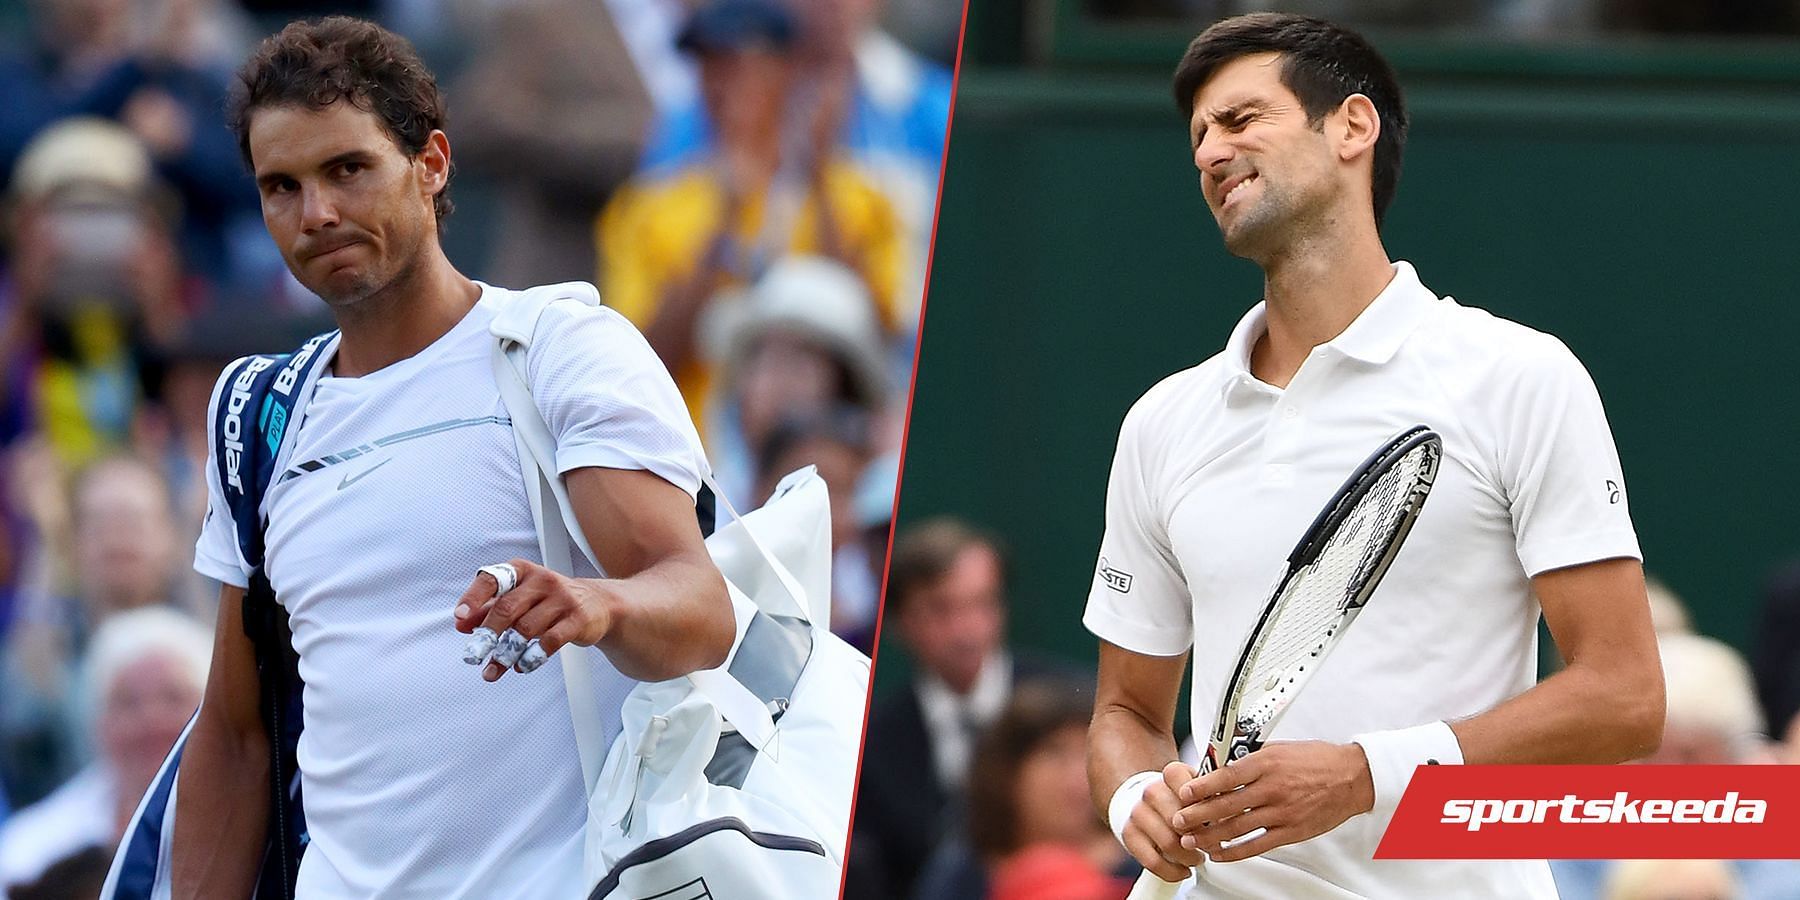 Wimbledon 2022: 7 men's players who were affected with the ATP's decision to not award the event ranking points ft. Rafael Nadal & Novak Djokovic